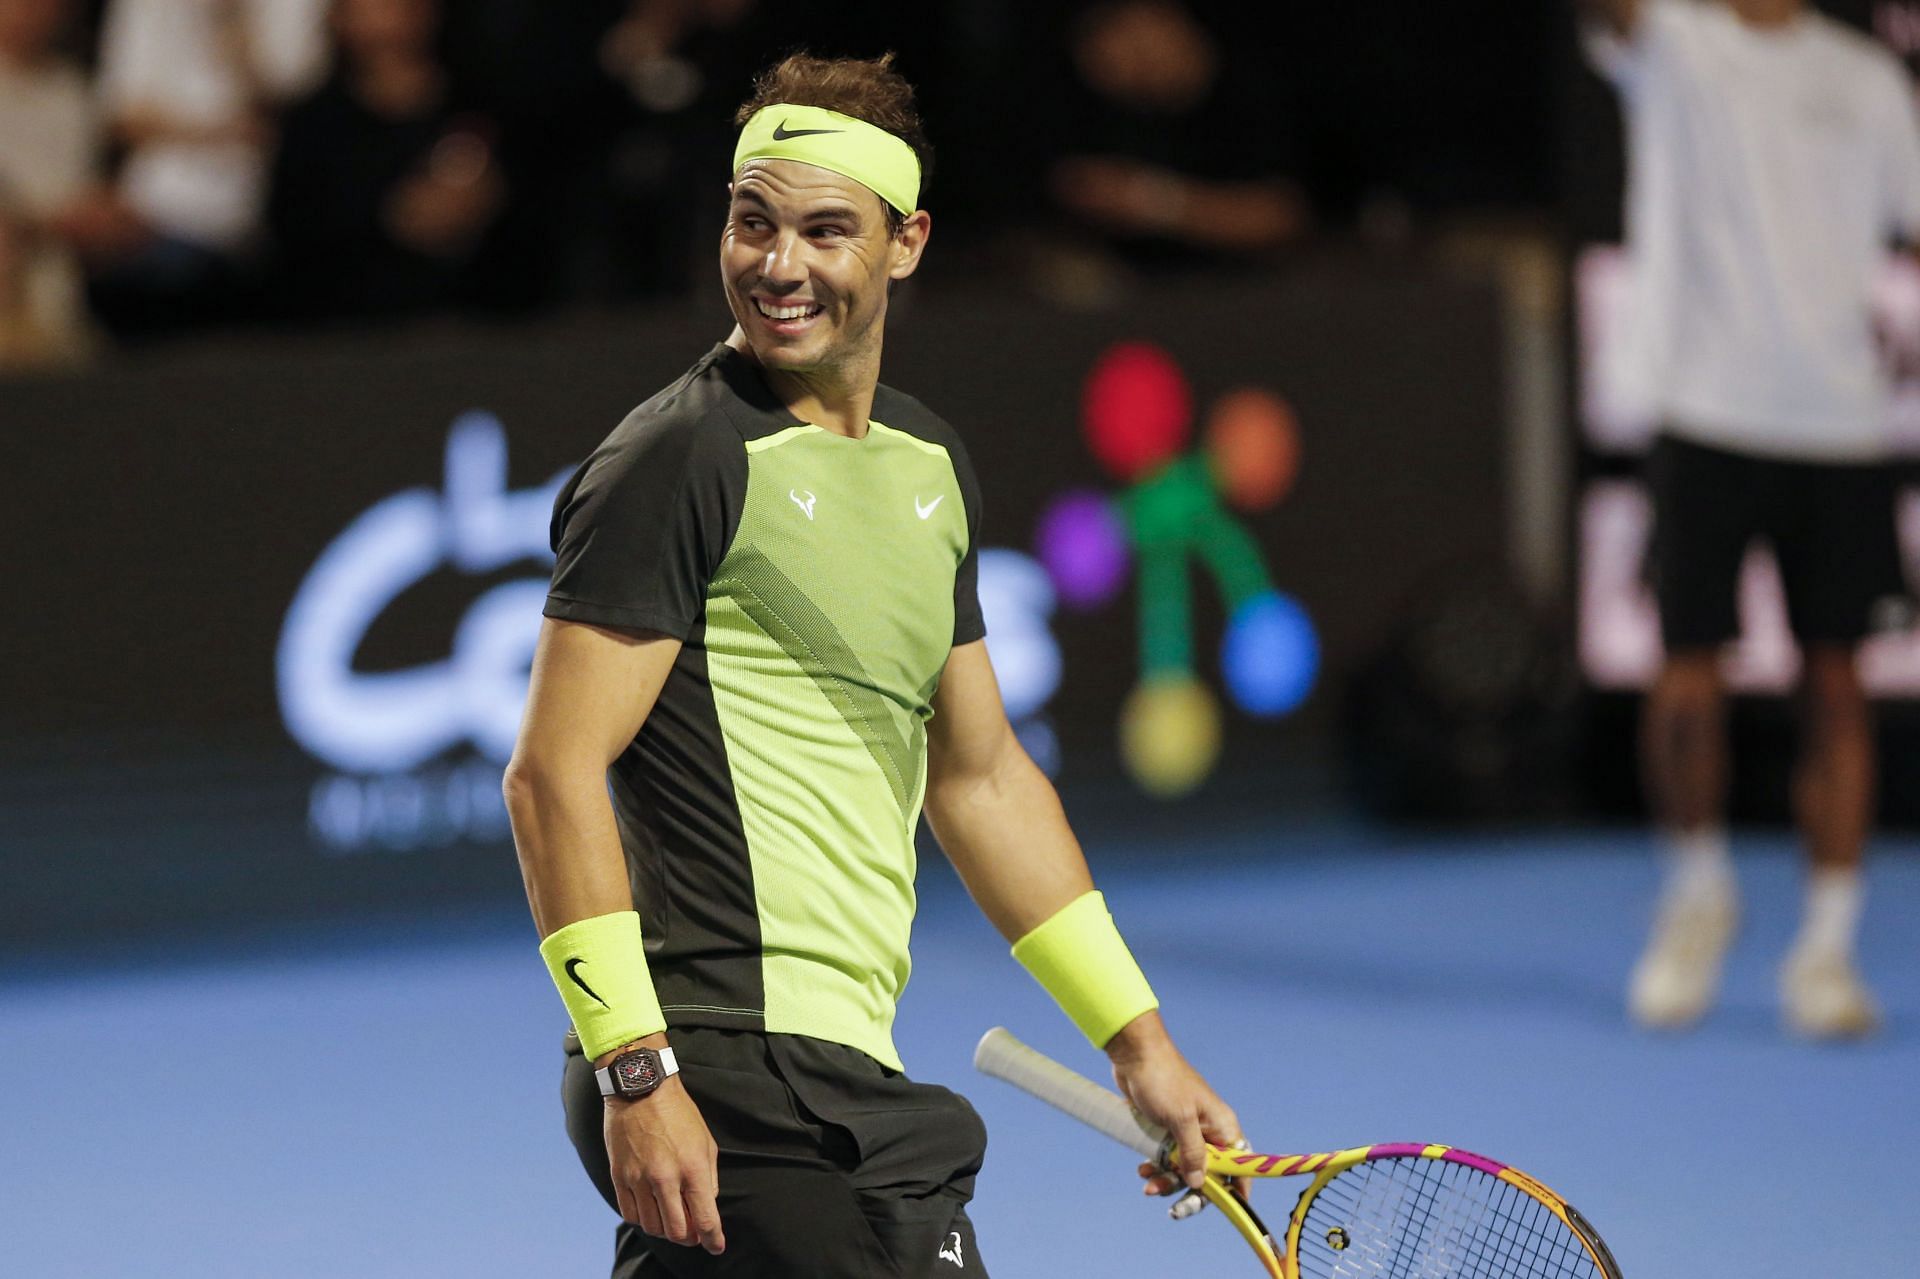 Rafael Nadal added yet another feather to his cap by winning the AS Athlete of the Year award for the sixth time.